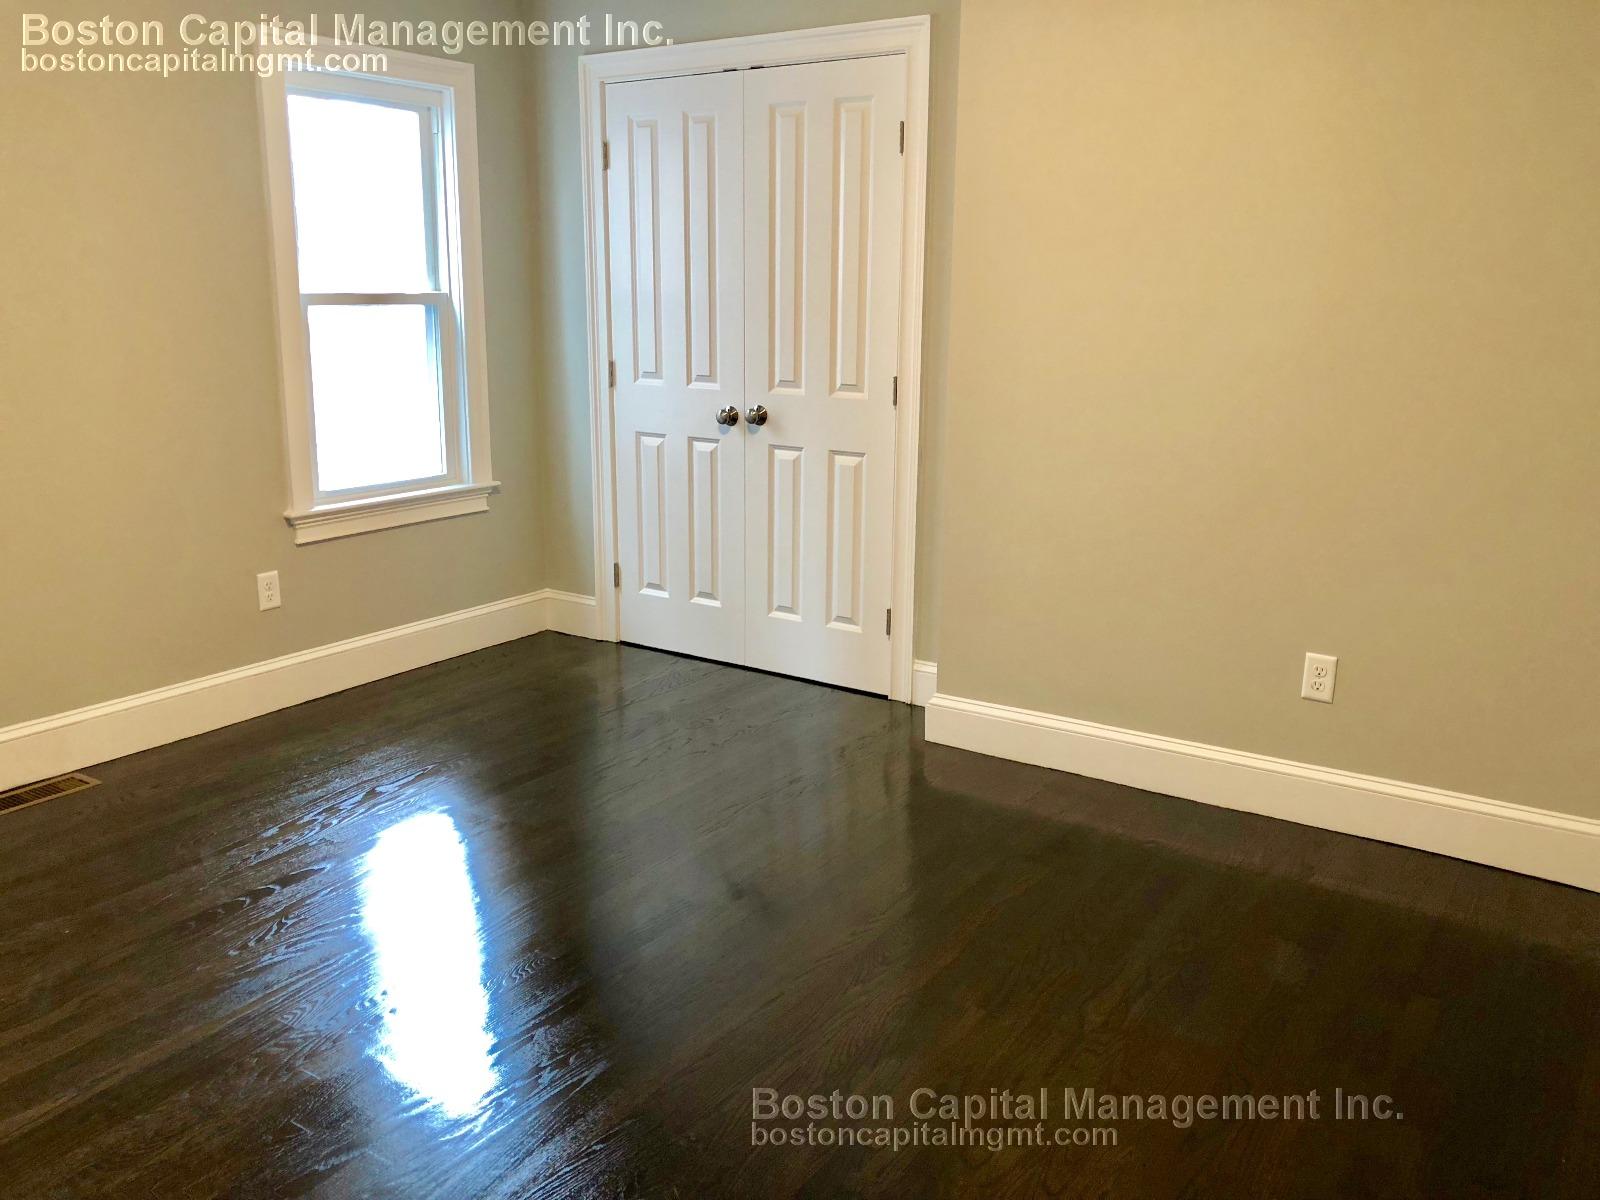 Photos of apartment on Grant St.,Somerville MA 02145